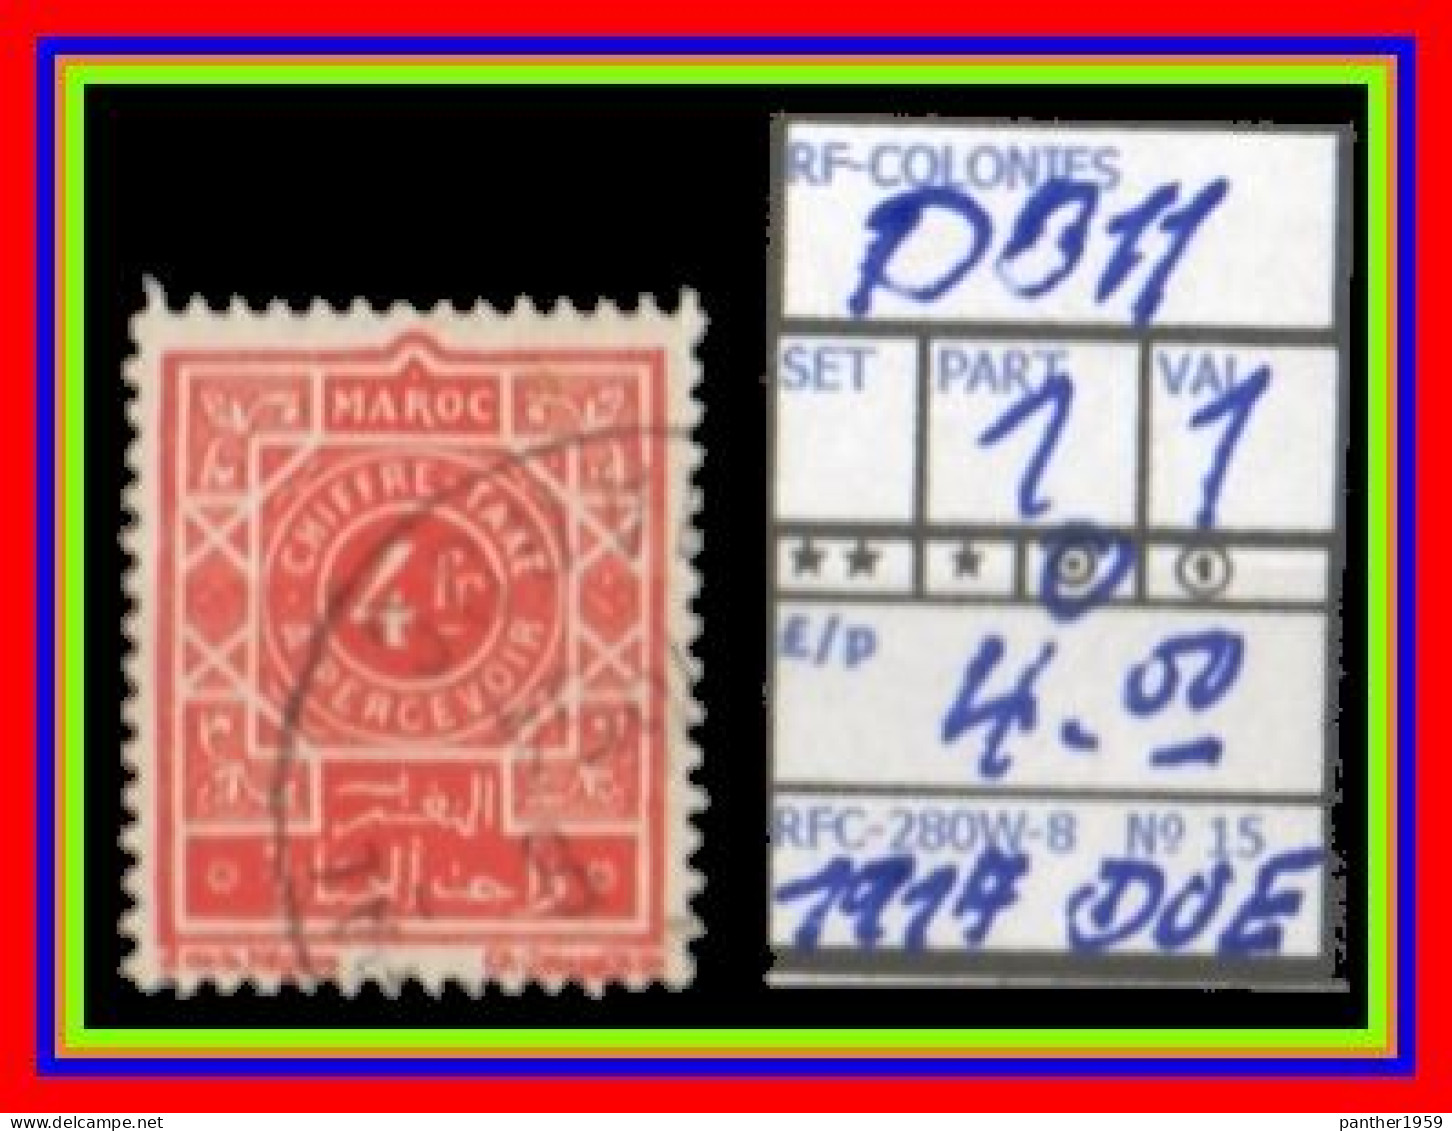 EUROPE>FRANCE COLONIES# MOROCCO# #DEFINITIVES#PARTIAL SET# MNH/**MH*#USED (RFC-280W-8) (15) - Impuestos